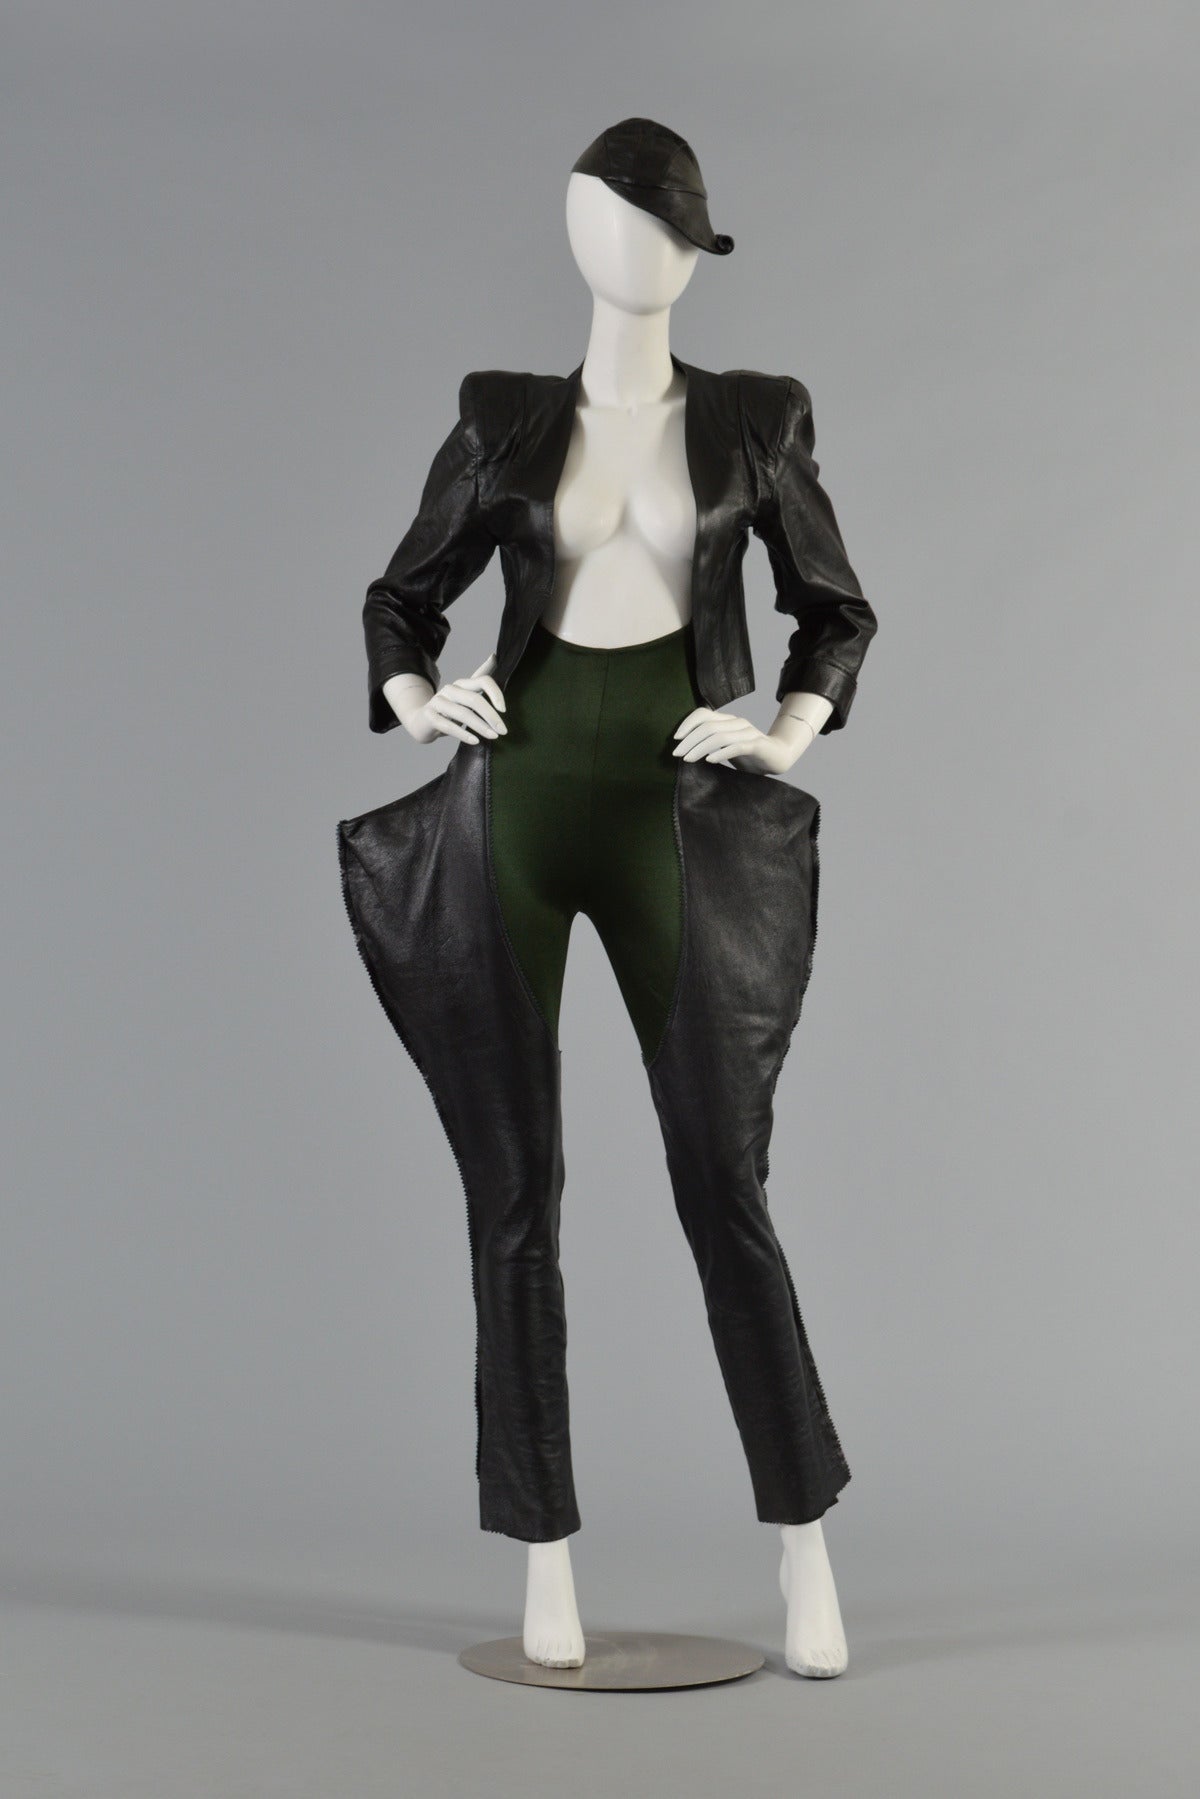 Iconic vintage 1979 Norma Kamali 3 piece leather + spandex ensemble. 
Extremely rare very early OMO label. We have seen photos of this set but have NEVER seen it for sale anywhere. 

Ultra snug evergreen colored disco-weight spandex suspender